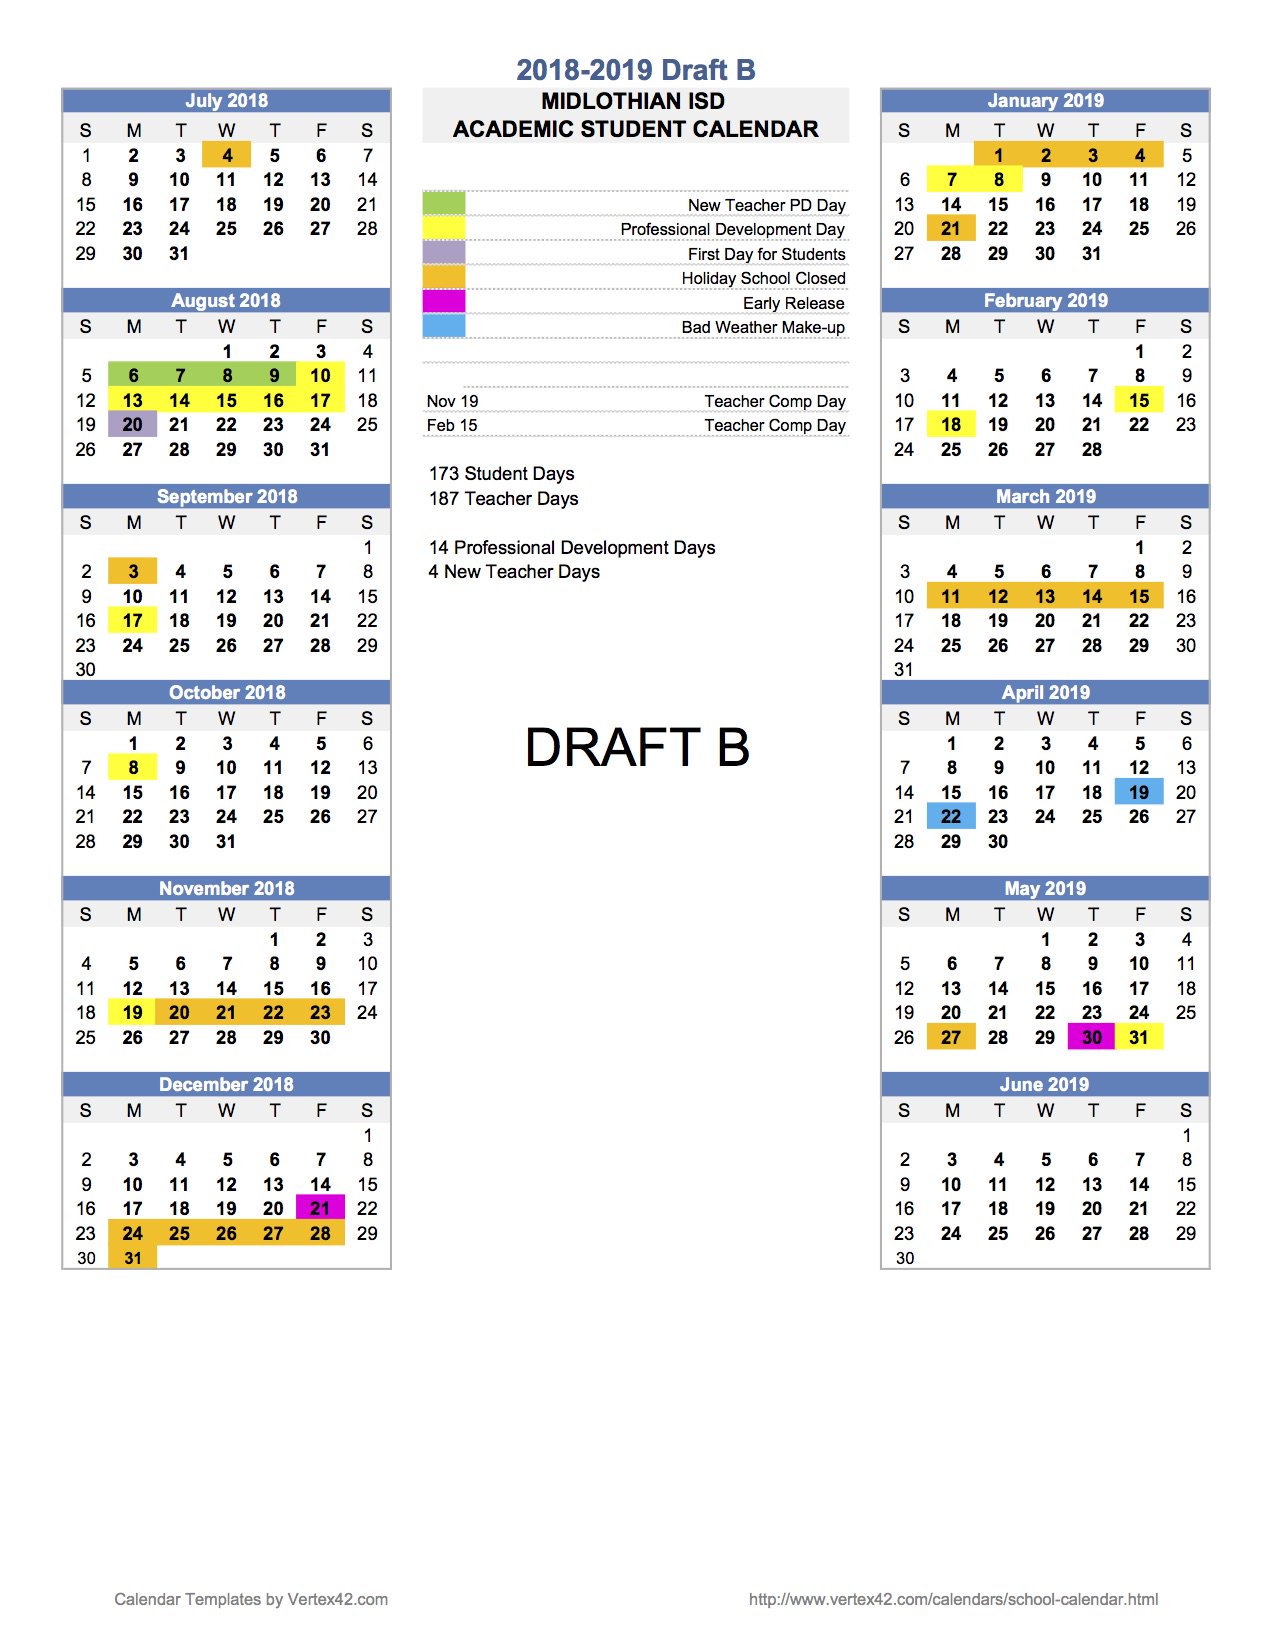 Midlothian Isd On Twitter Tonight Our Board Of Trustees Approved 2018 19 School Calendar Option B Is The Calendar Selected Based On Votes By Our Misd Community Https T Co Ltminpvtdt